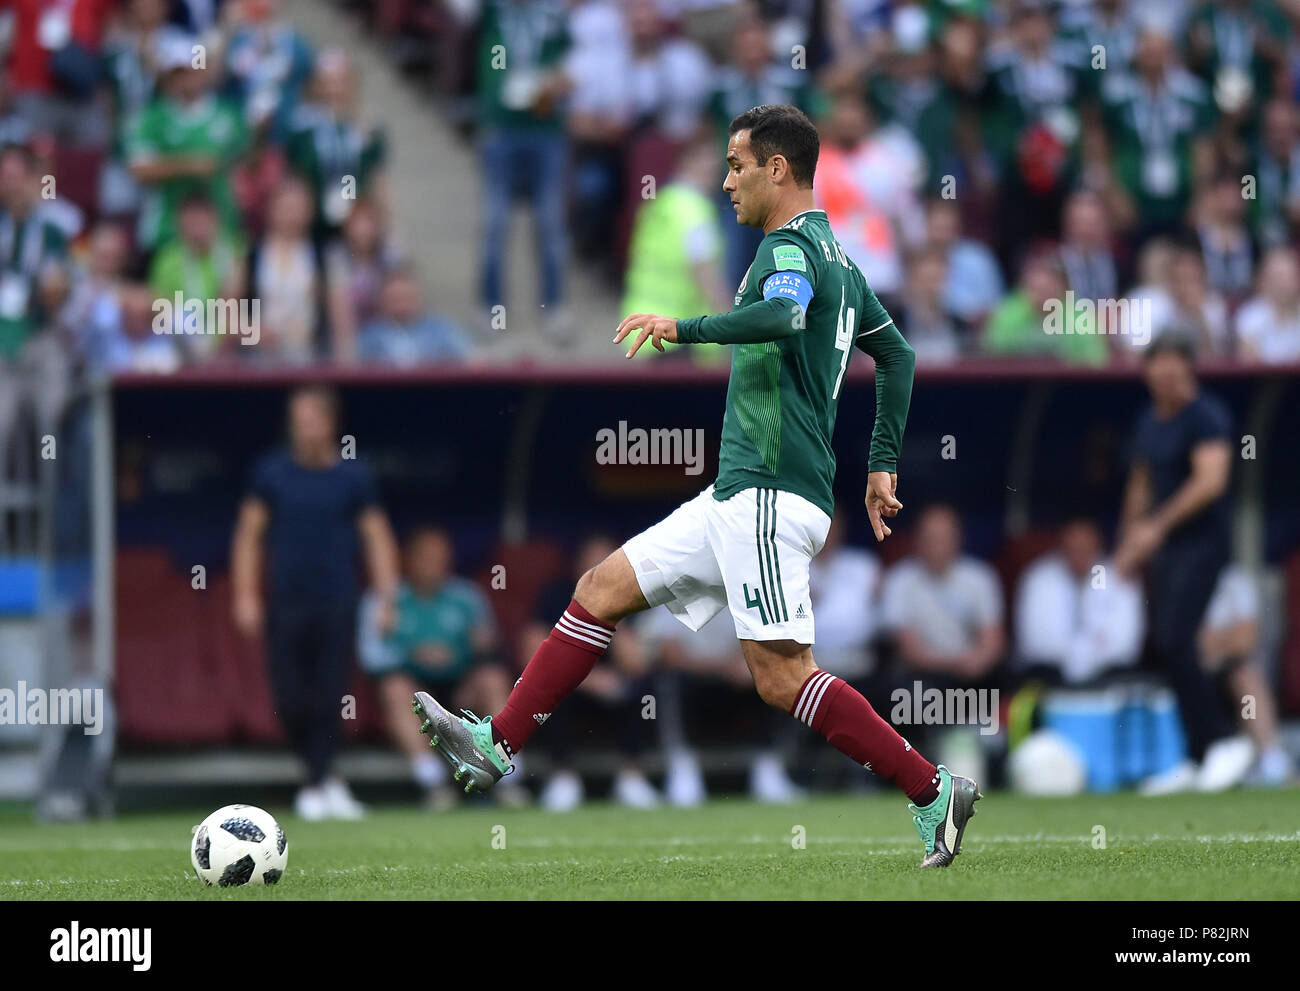 MOSCOW, RUSSIA - JUNE 17: Rafael Marquez of Mexico in action during the 2018 FIFA World Cup Russia group F match between Germany and Mexico at Luzhniki Stadium on June 17, 2018 in Moscow, Russia. (Photo by Lukasz Laskowski/PressFocus/MB Media) Stock Photo